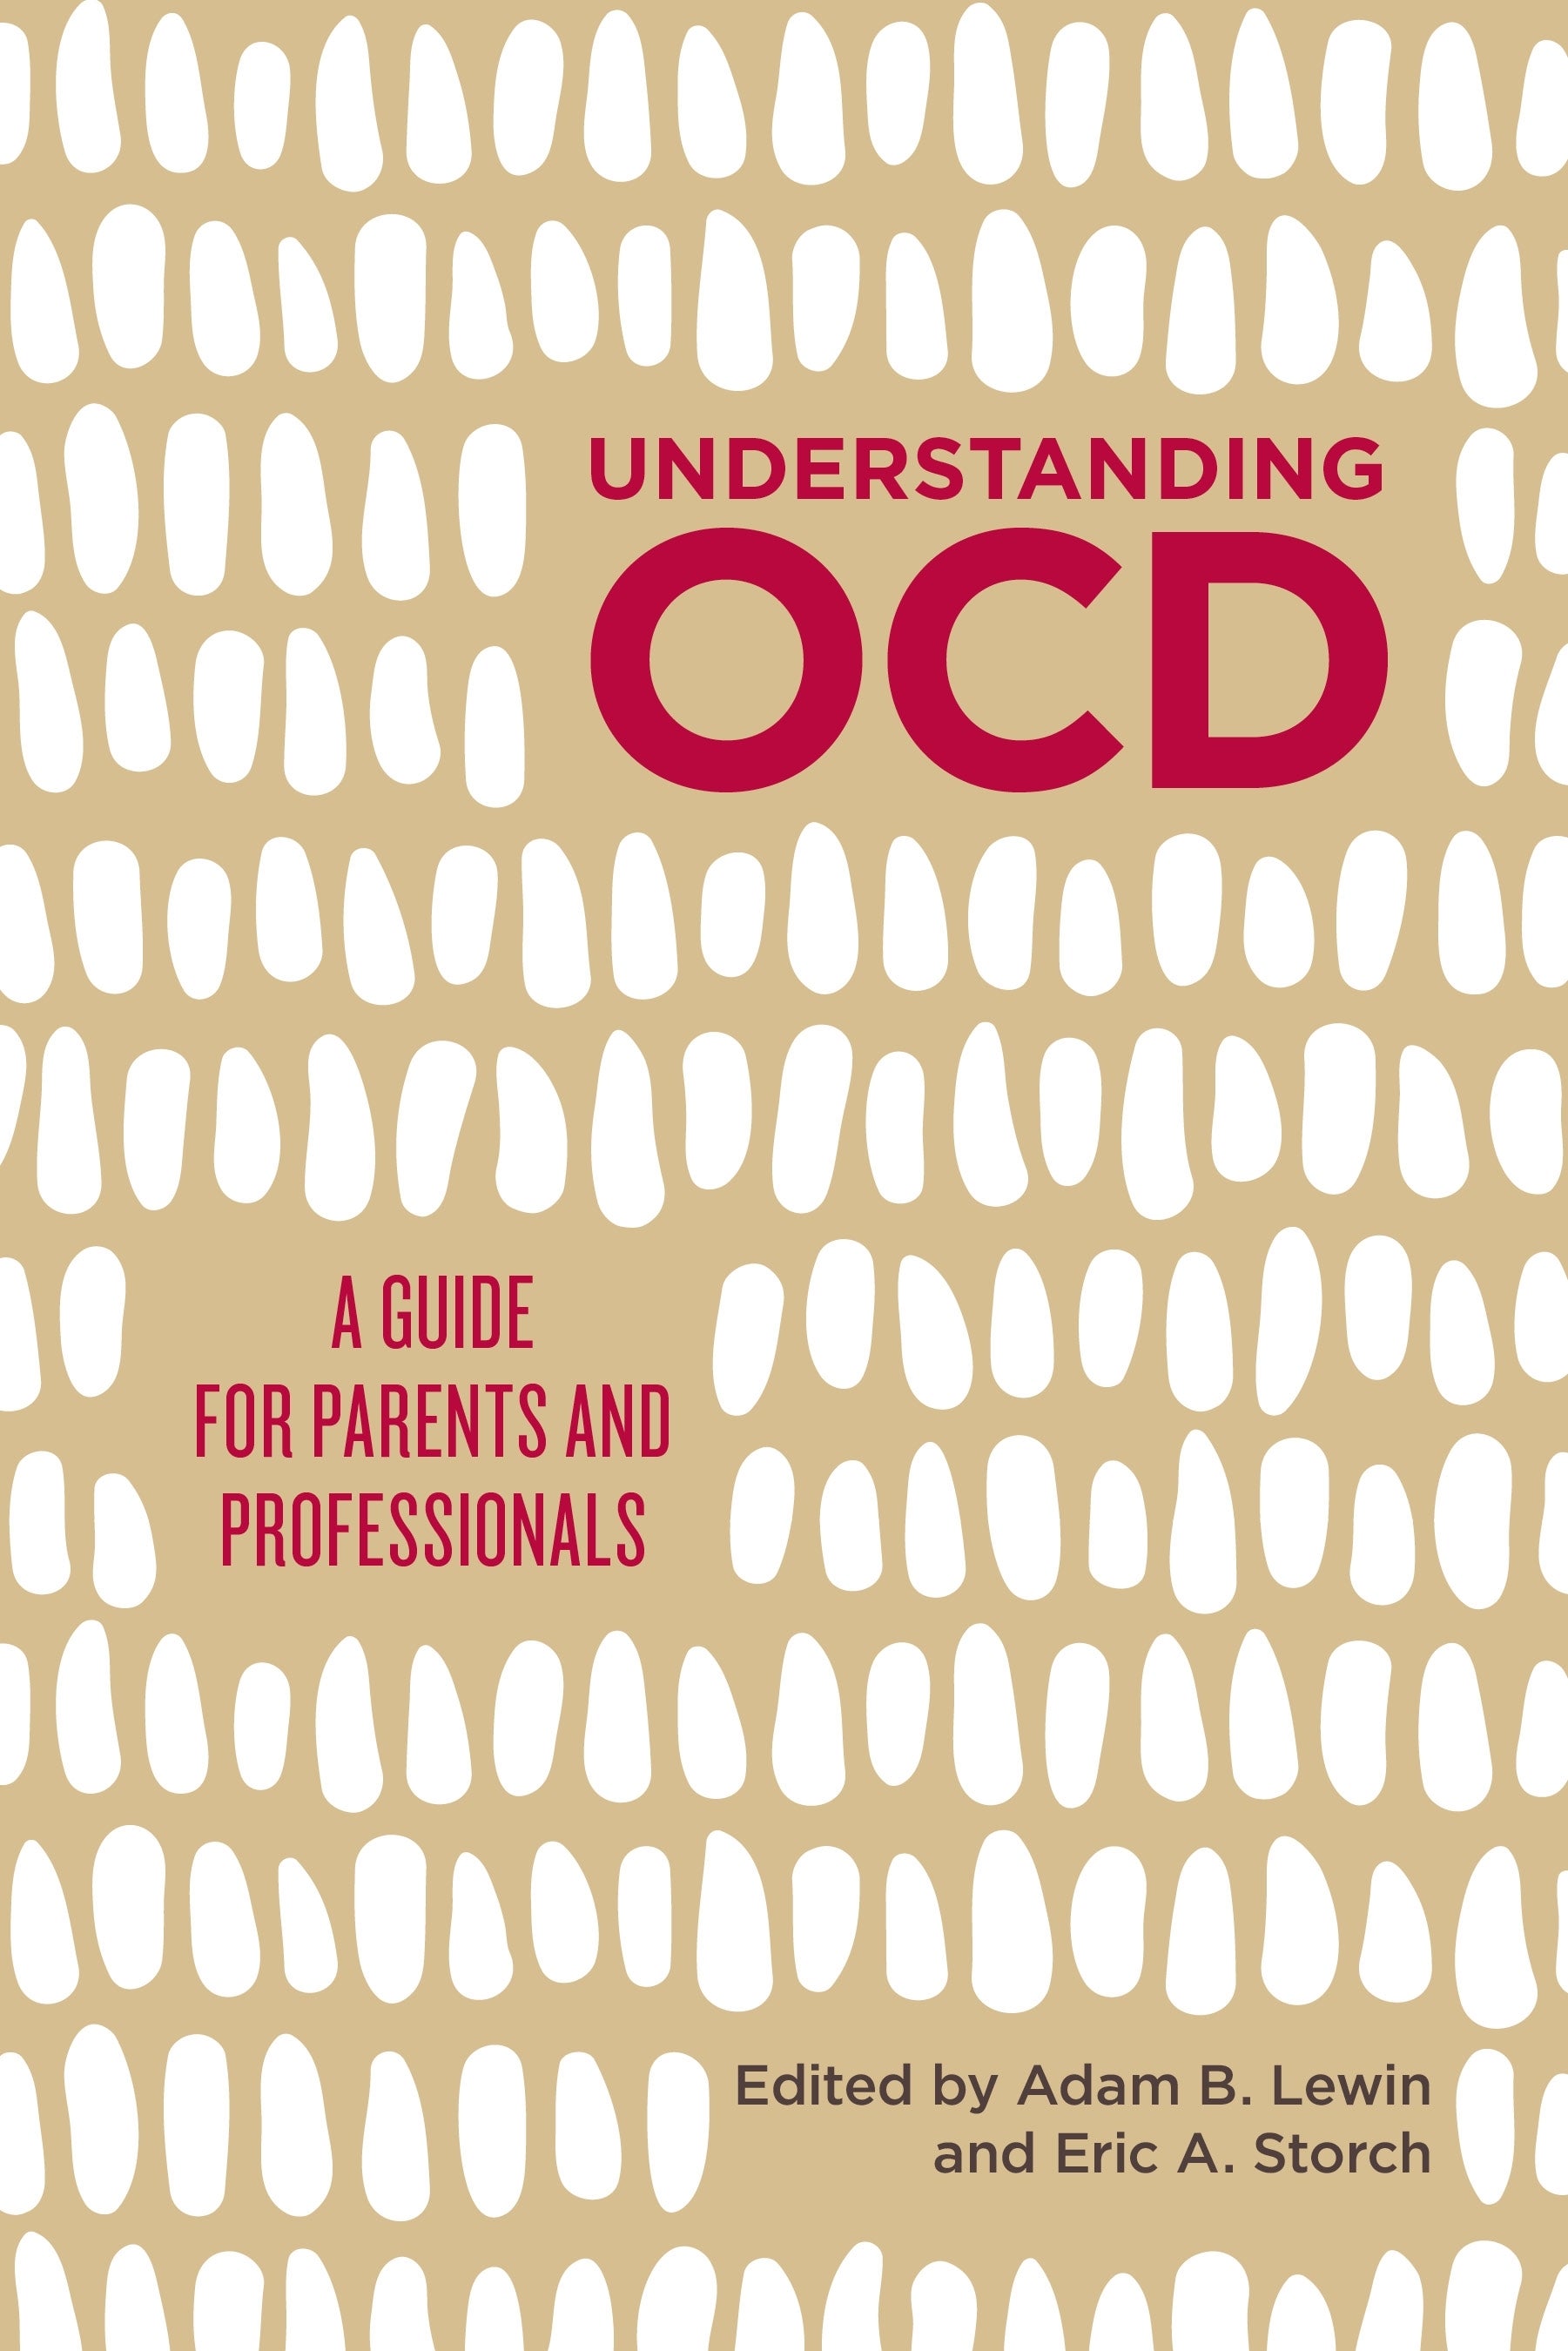 Understanding OCD by Adam B. Lewin, Eric A. Storch, No Author Listed